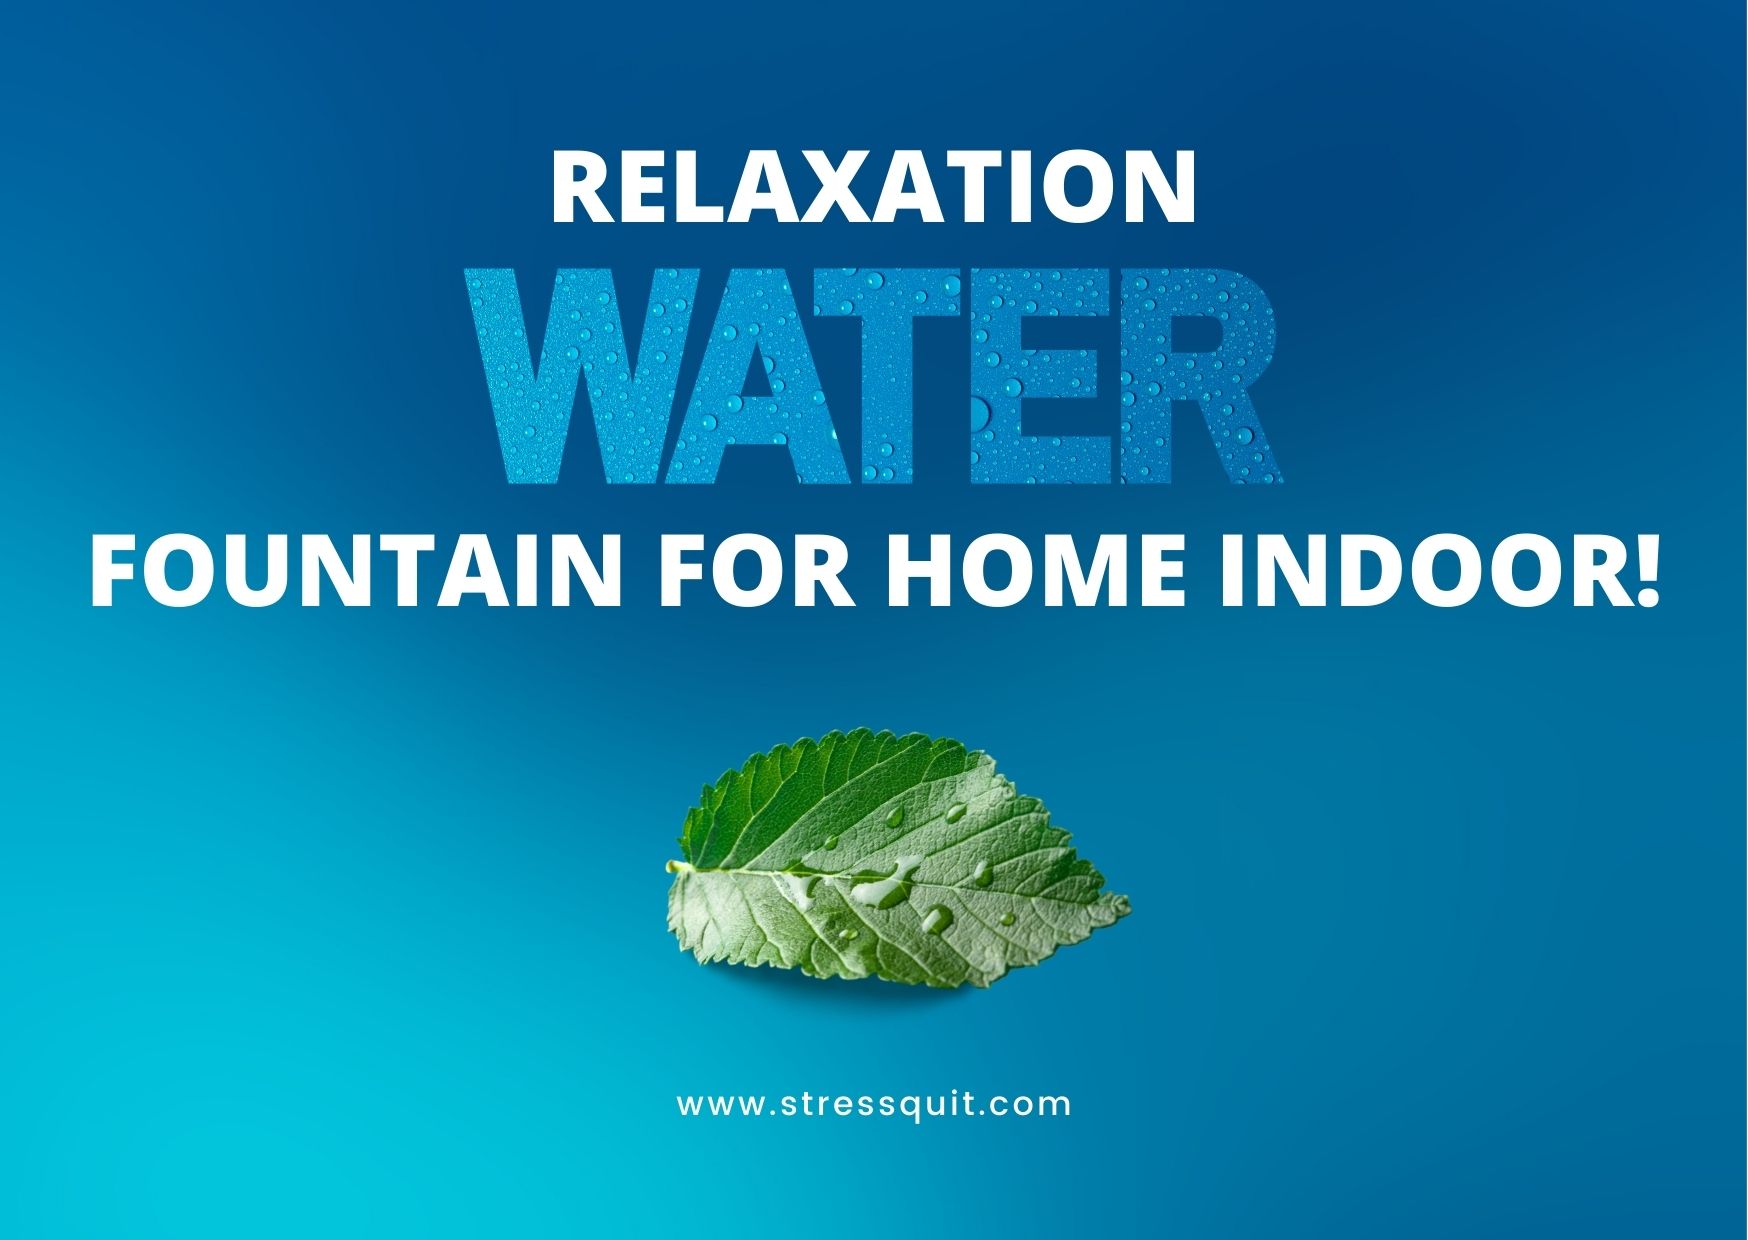 Find your inner peace with this beautiful relaxation water fountain for home indoor!